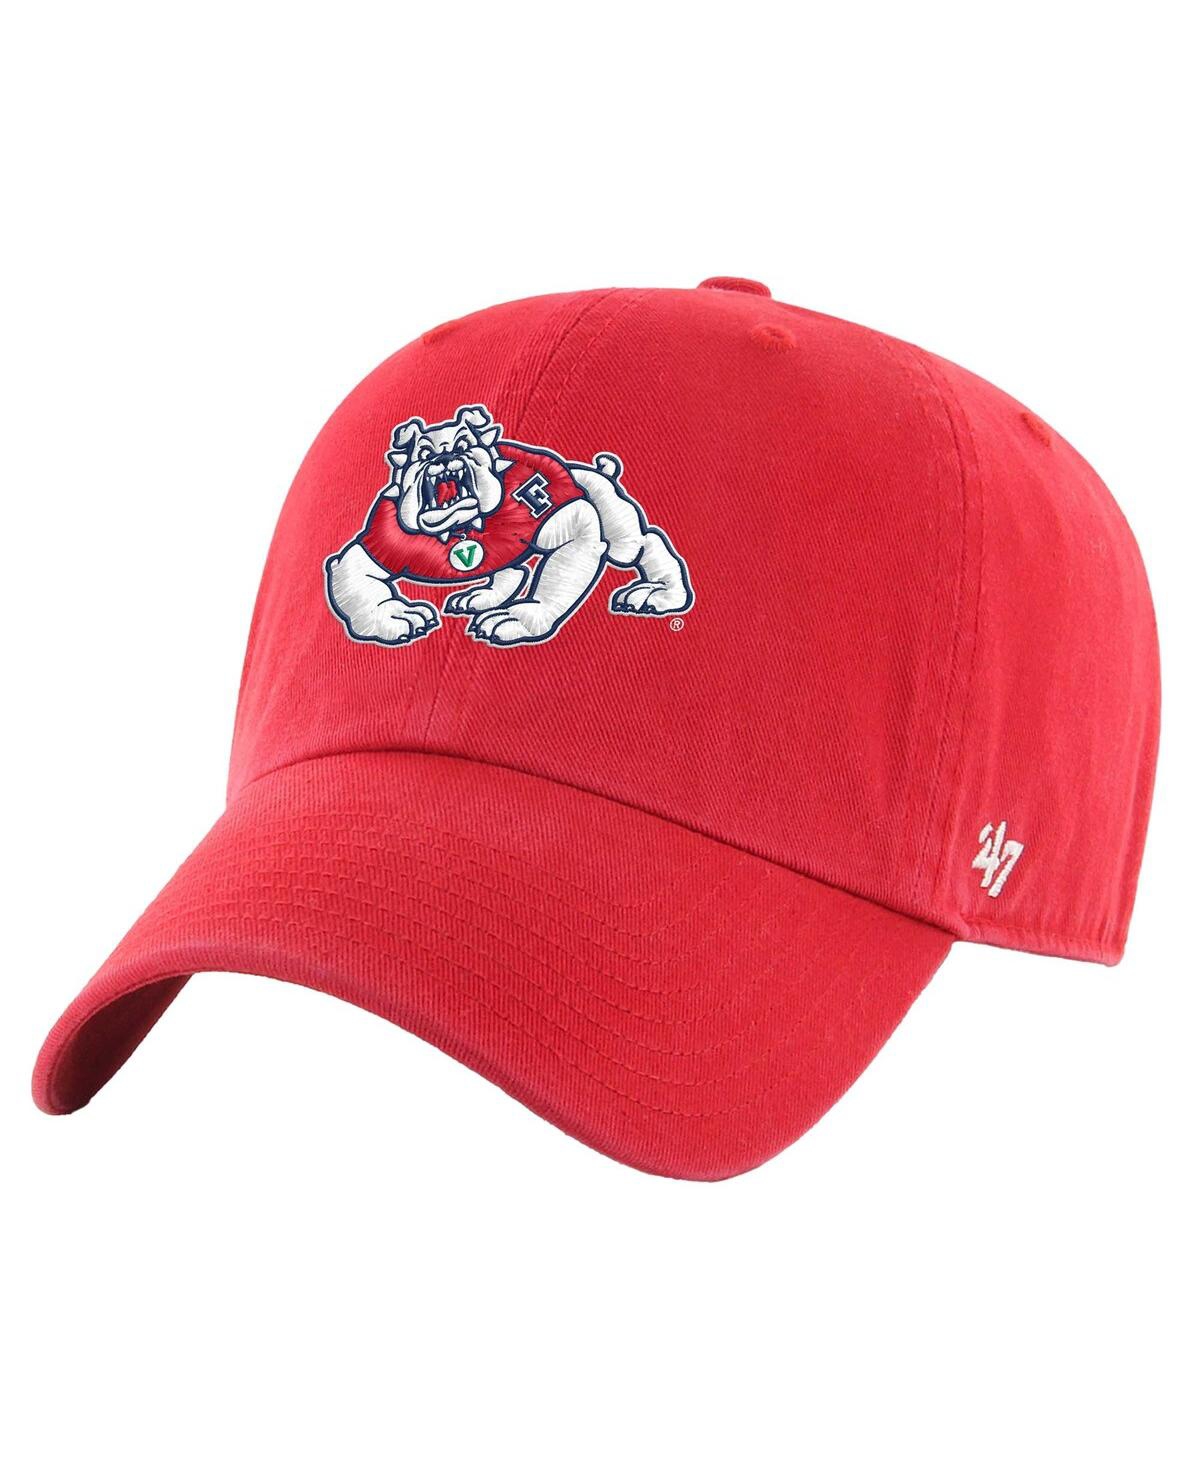 47 Men's Red Fresno State Bulldogs Clean Up Adjustable Hat - Red White